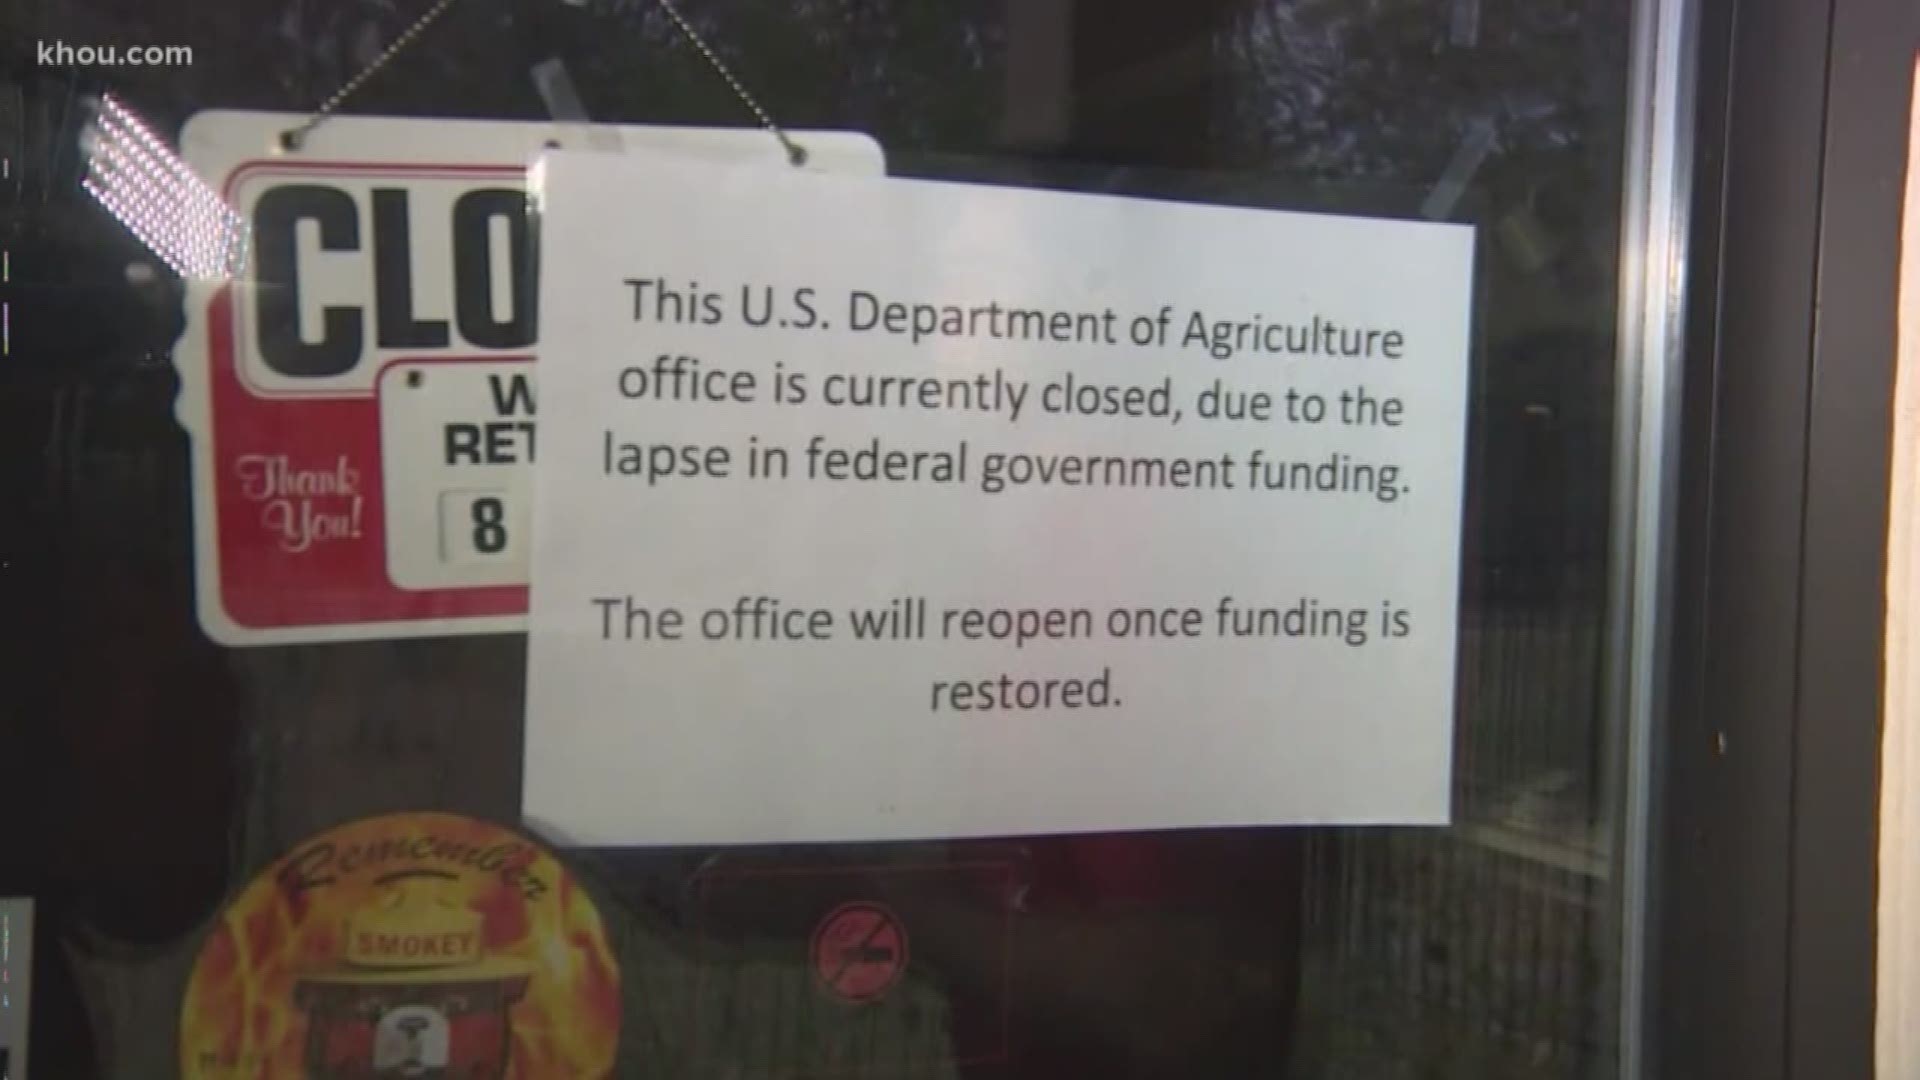 The U.S. Department of Agriculture is letting people know the park office is shut down.